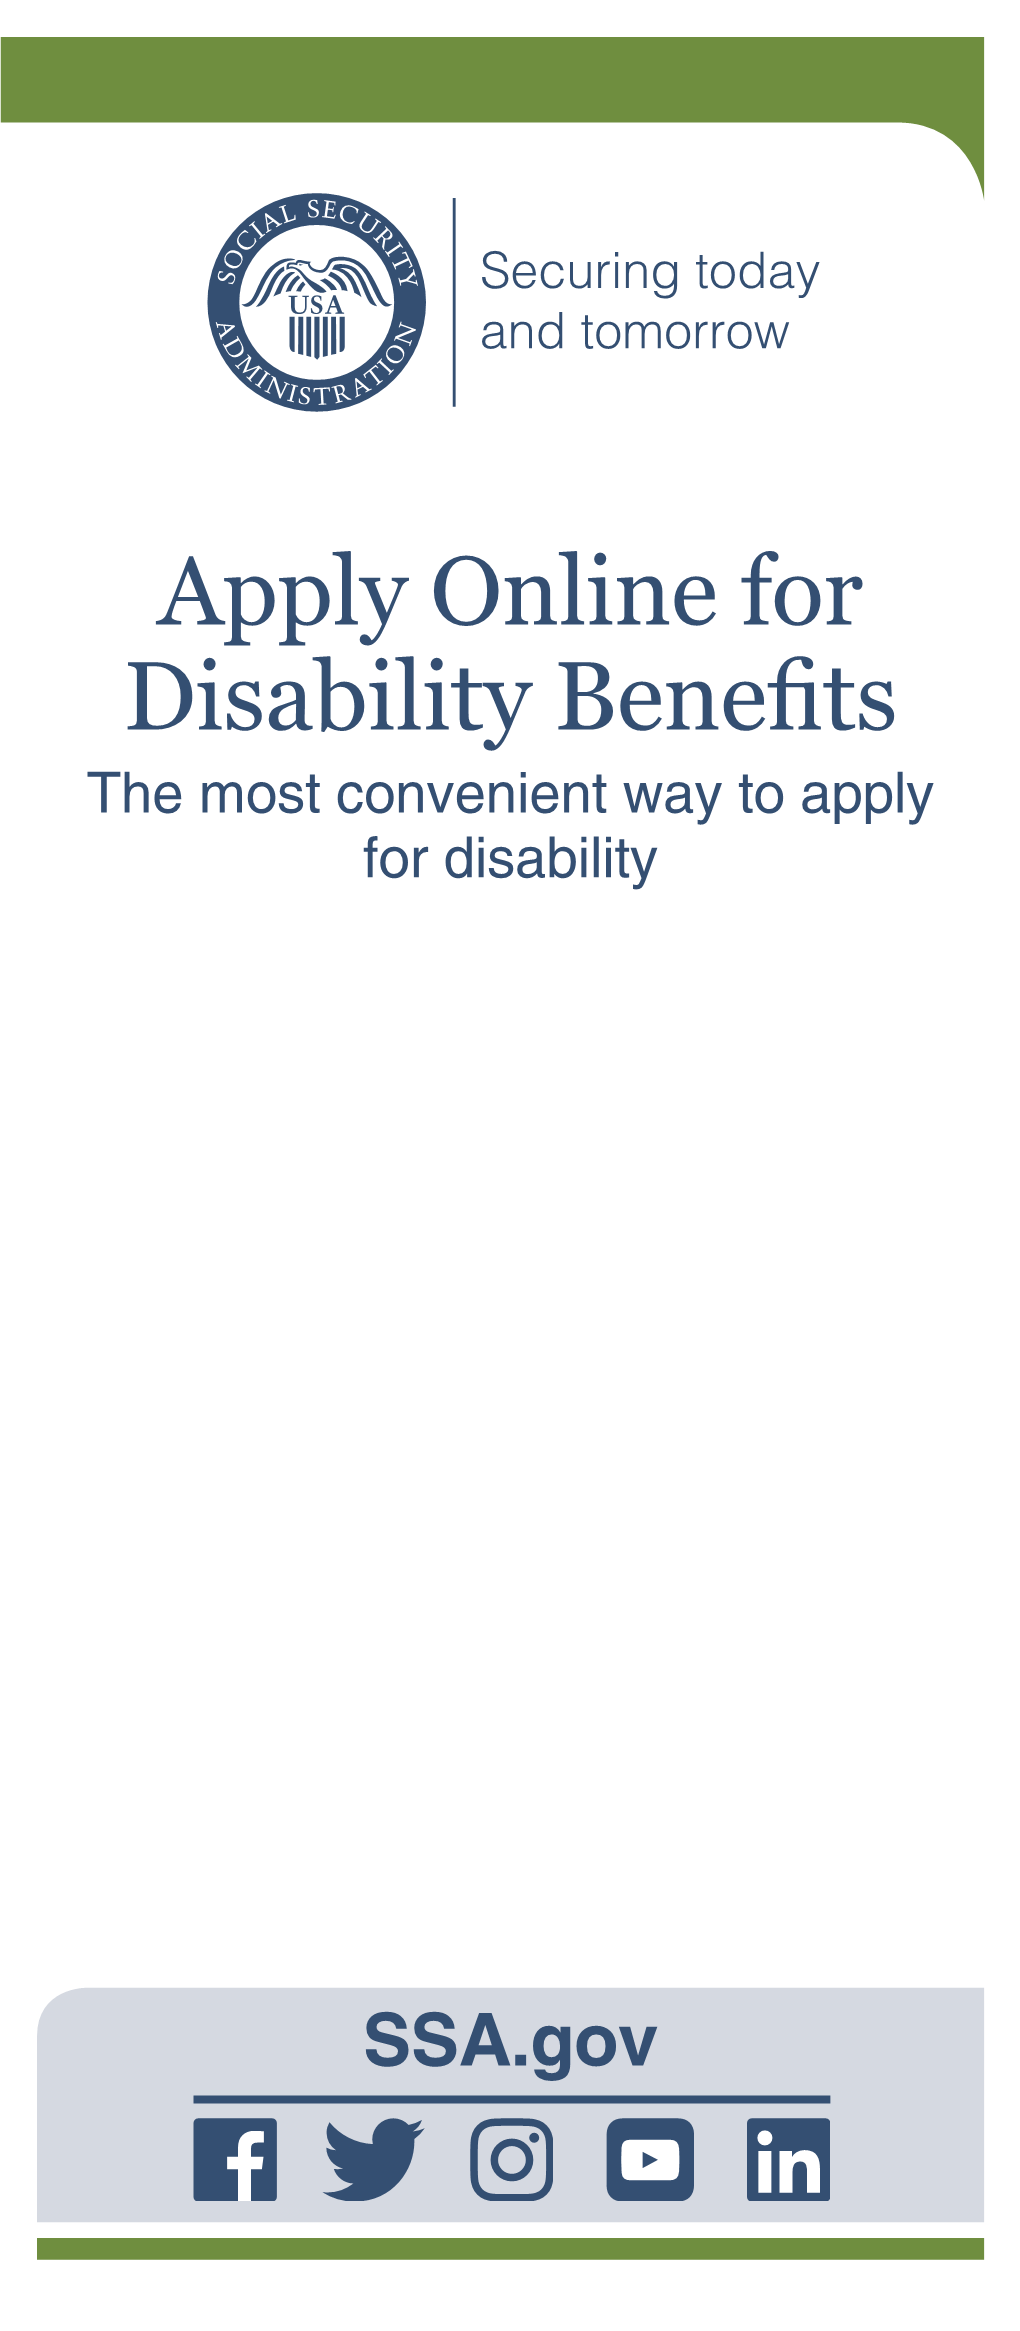 Apply Online for Disability Benefits the Most Convenient Way to Apply for Disability